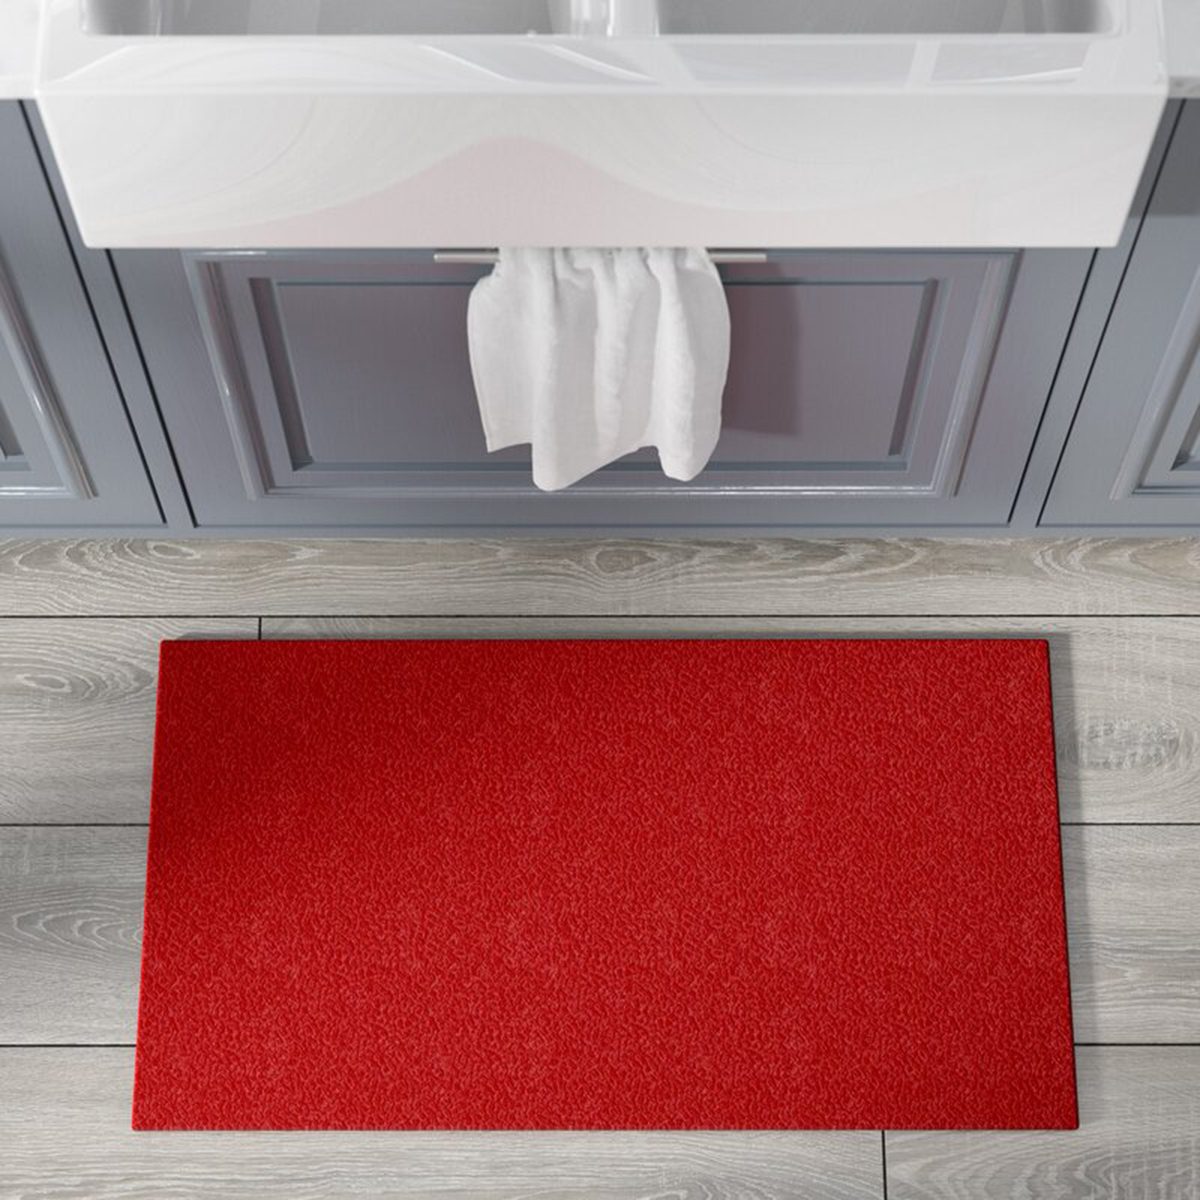 6 Best Kitchen Mats That Are Actually Stylish